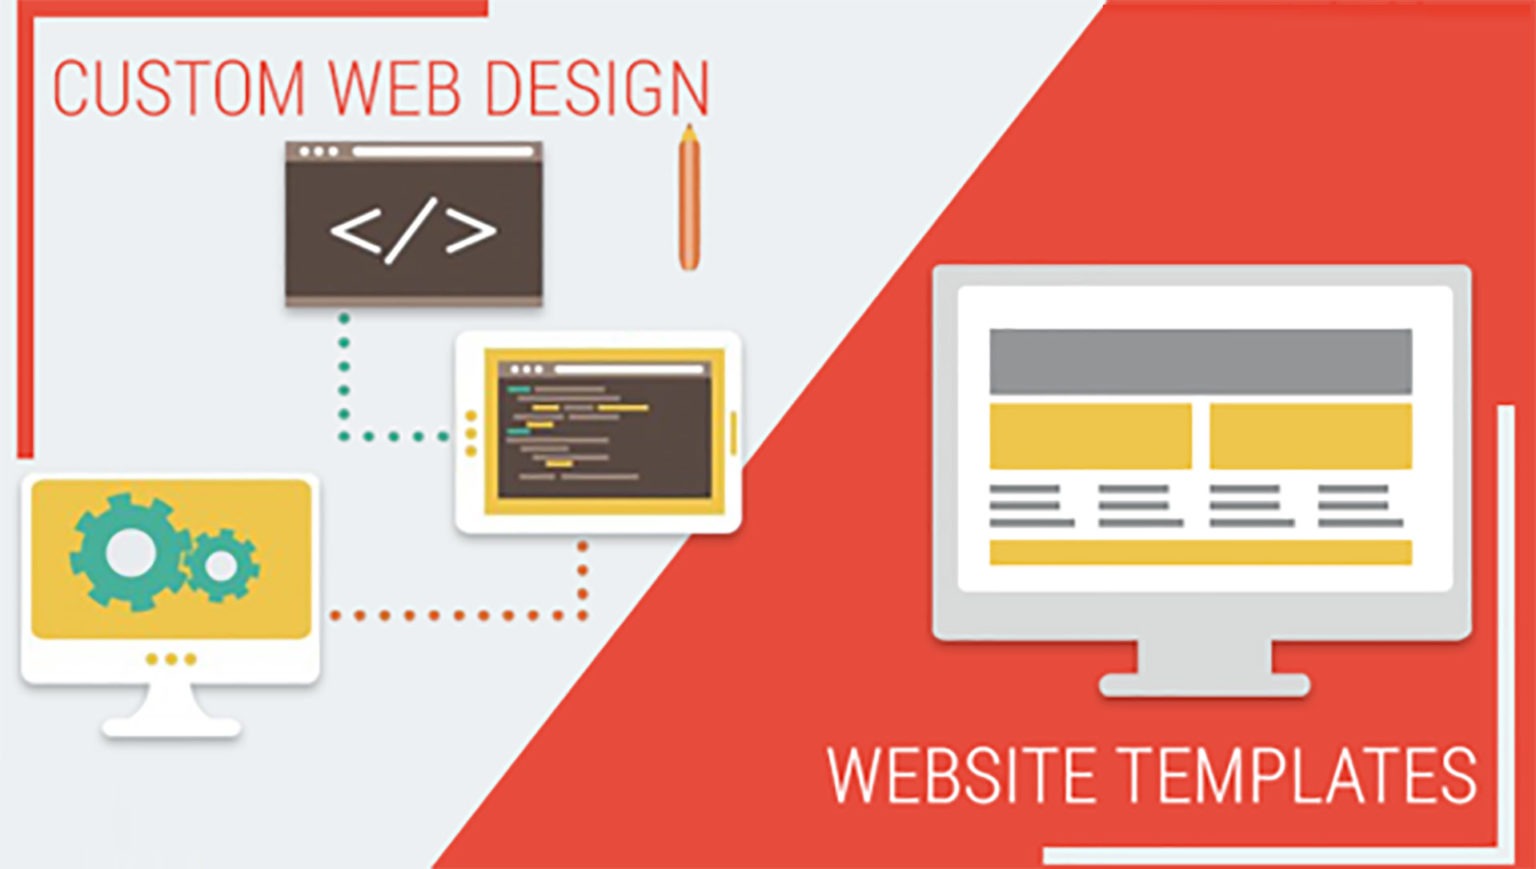 Why Custom Website Development is Important for Businesses